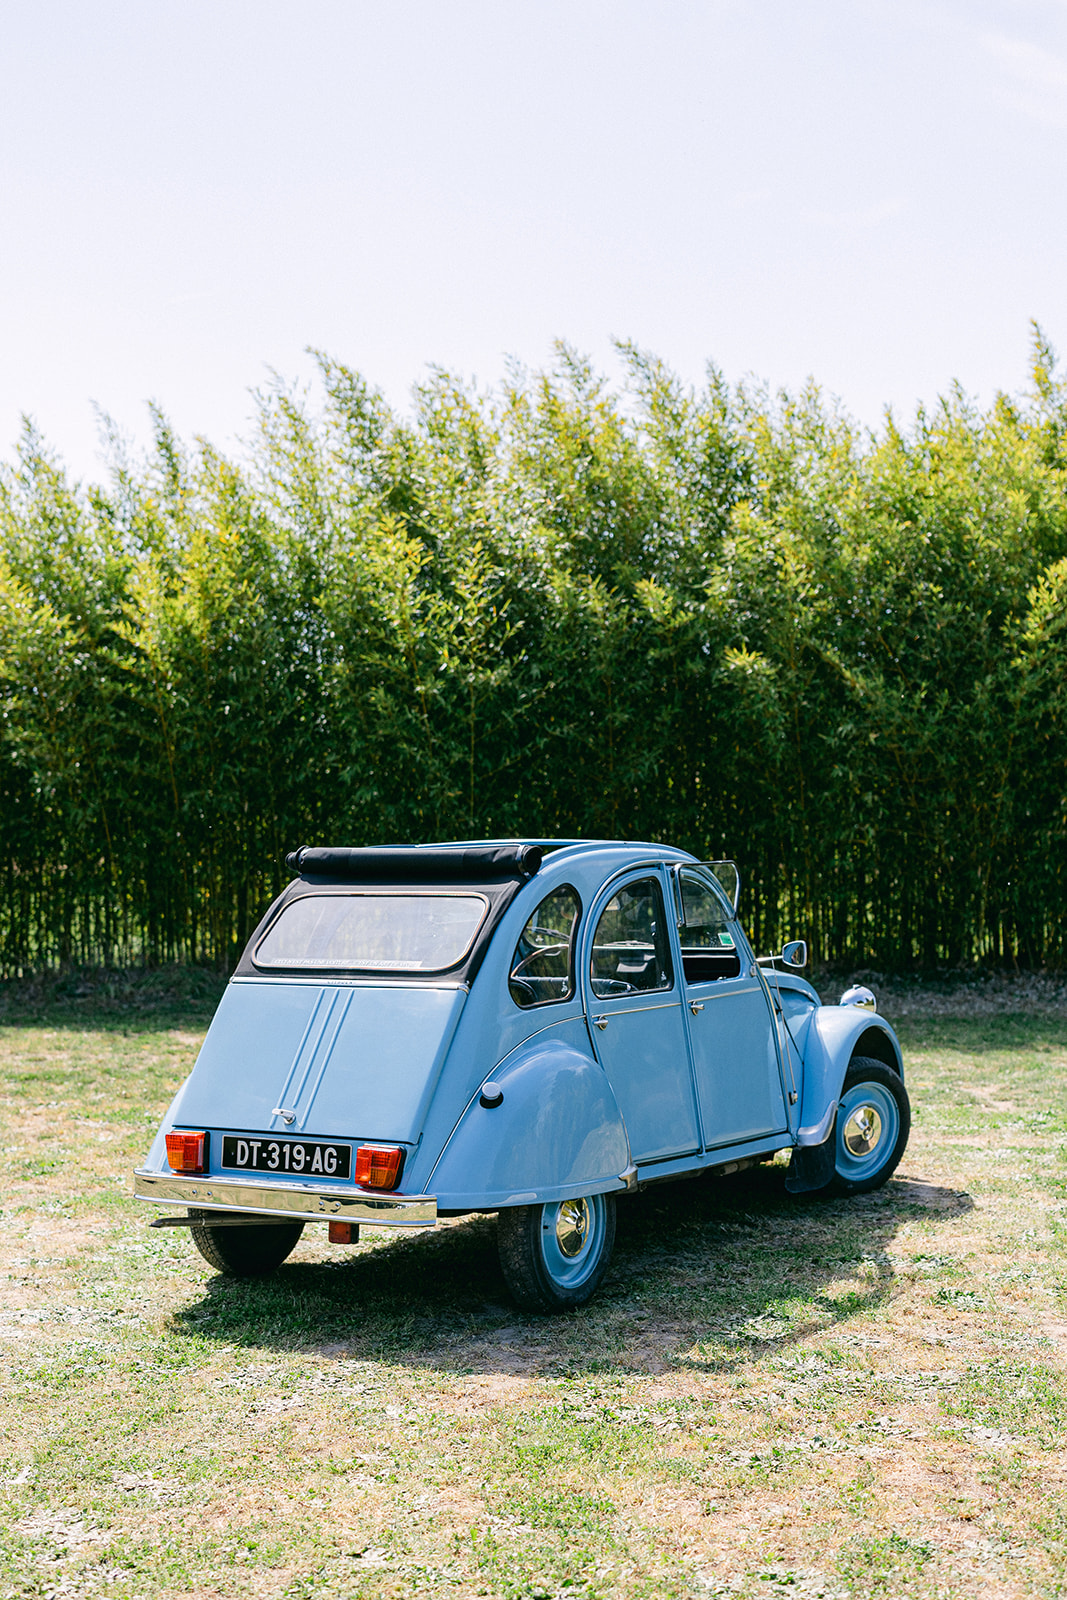 A view of the Provence Classics 1985 2CV